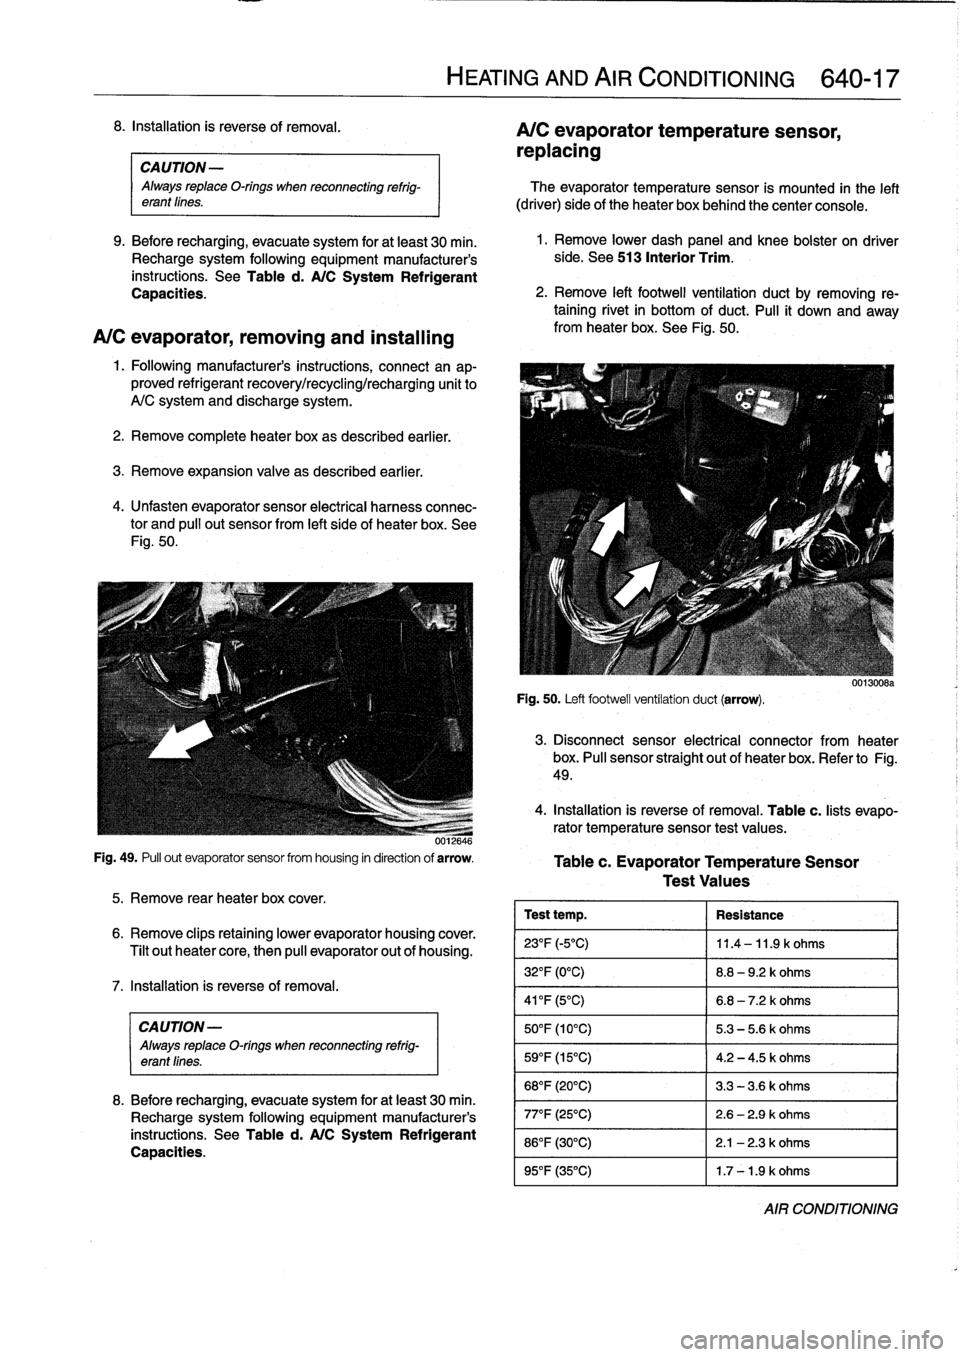 BMW 318i 1997 E36 Owners Manual 
CAUTION
-

Always
replace
O-rings
when
reconnecting
refrig-
erant
fines
.

9
.
Before
recharging,
evacuate
system
for
at
least
30
min
.
Recharge
system
following
equipment
manufacturers
instructions